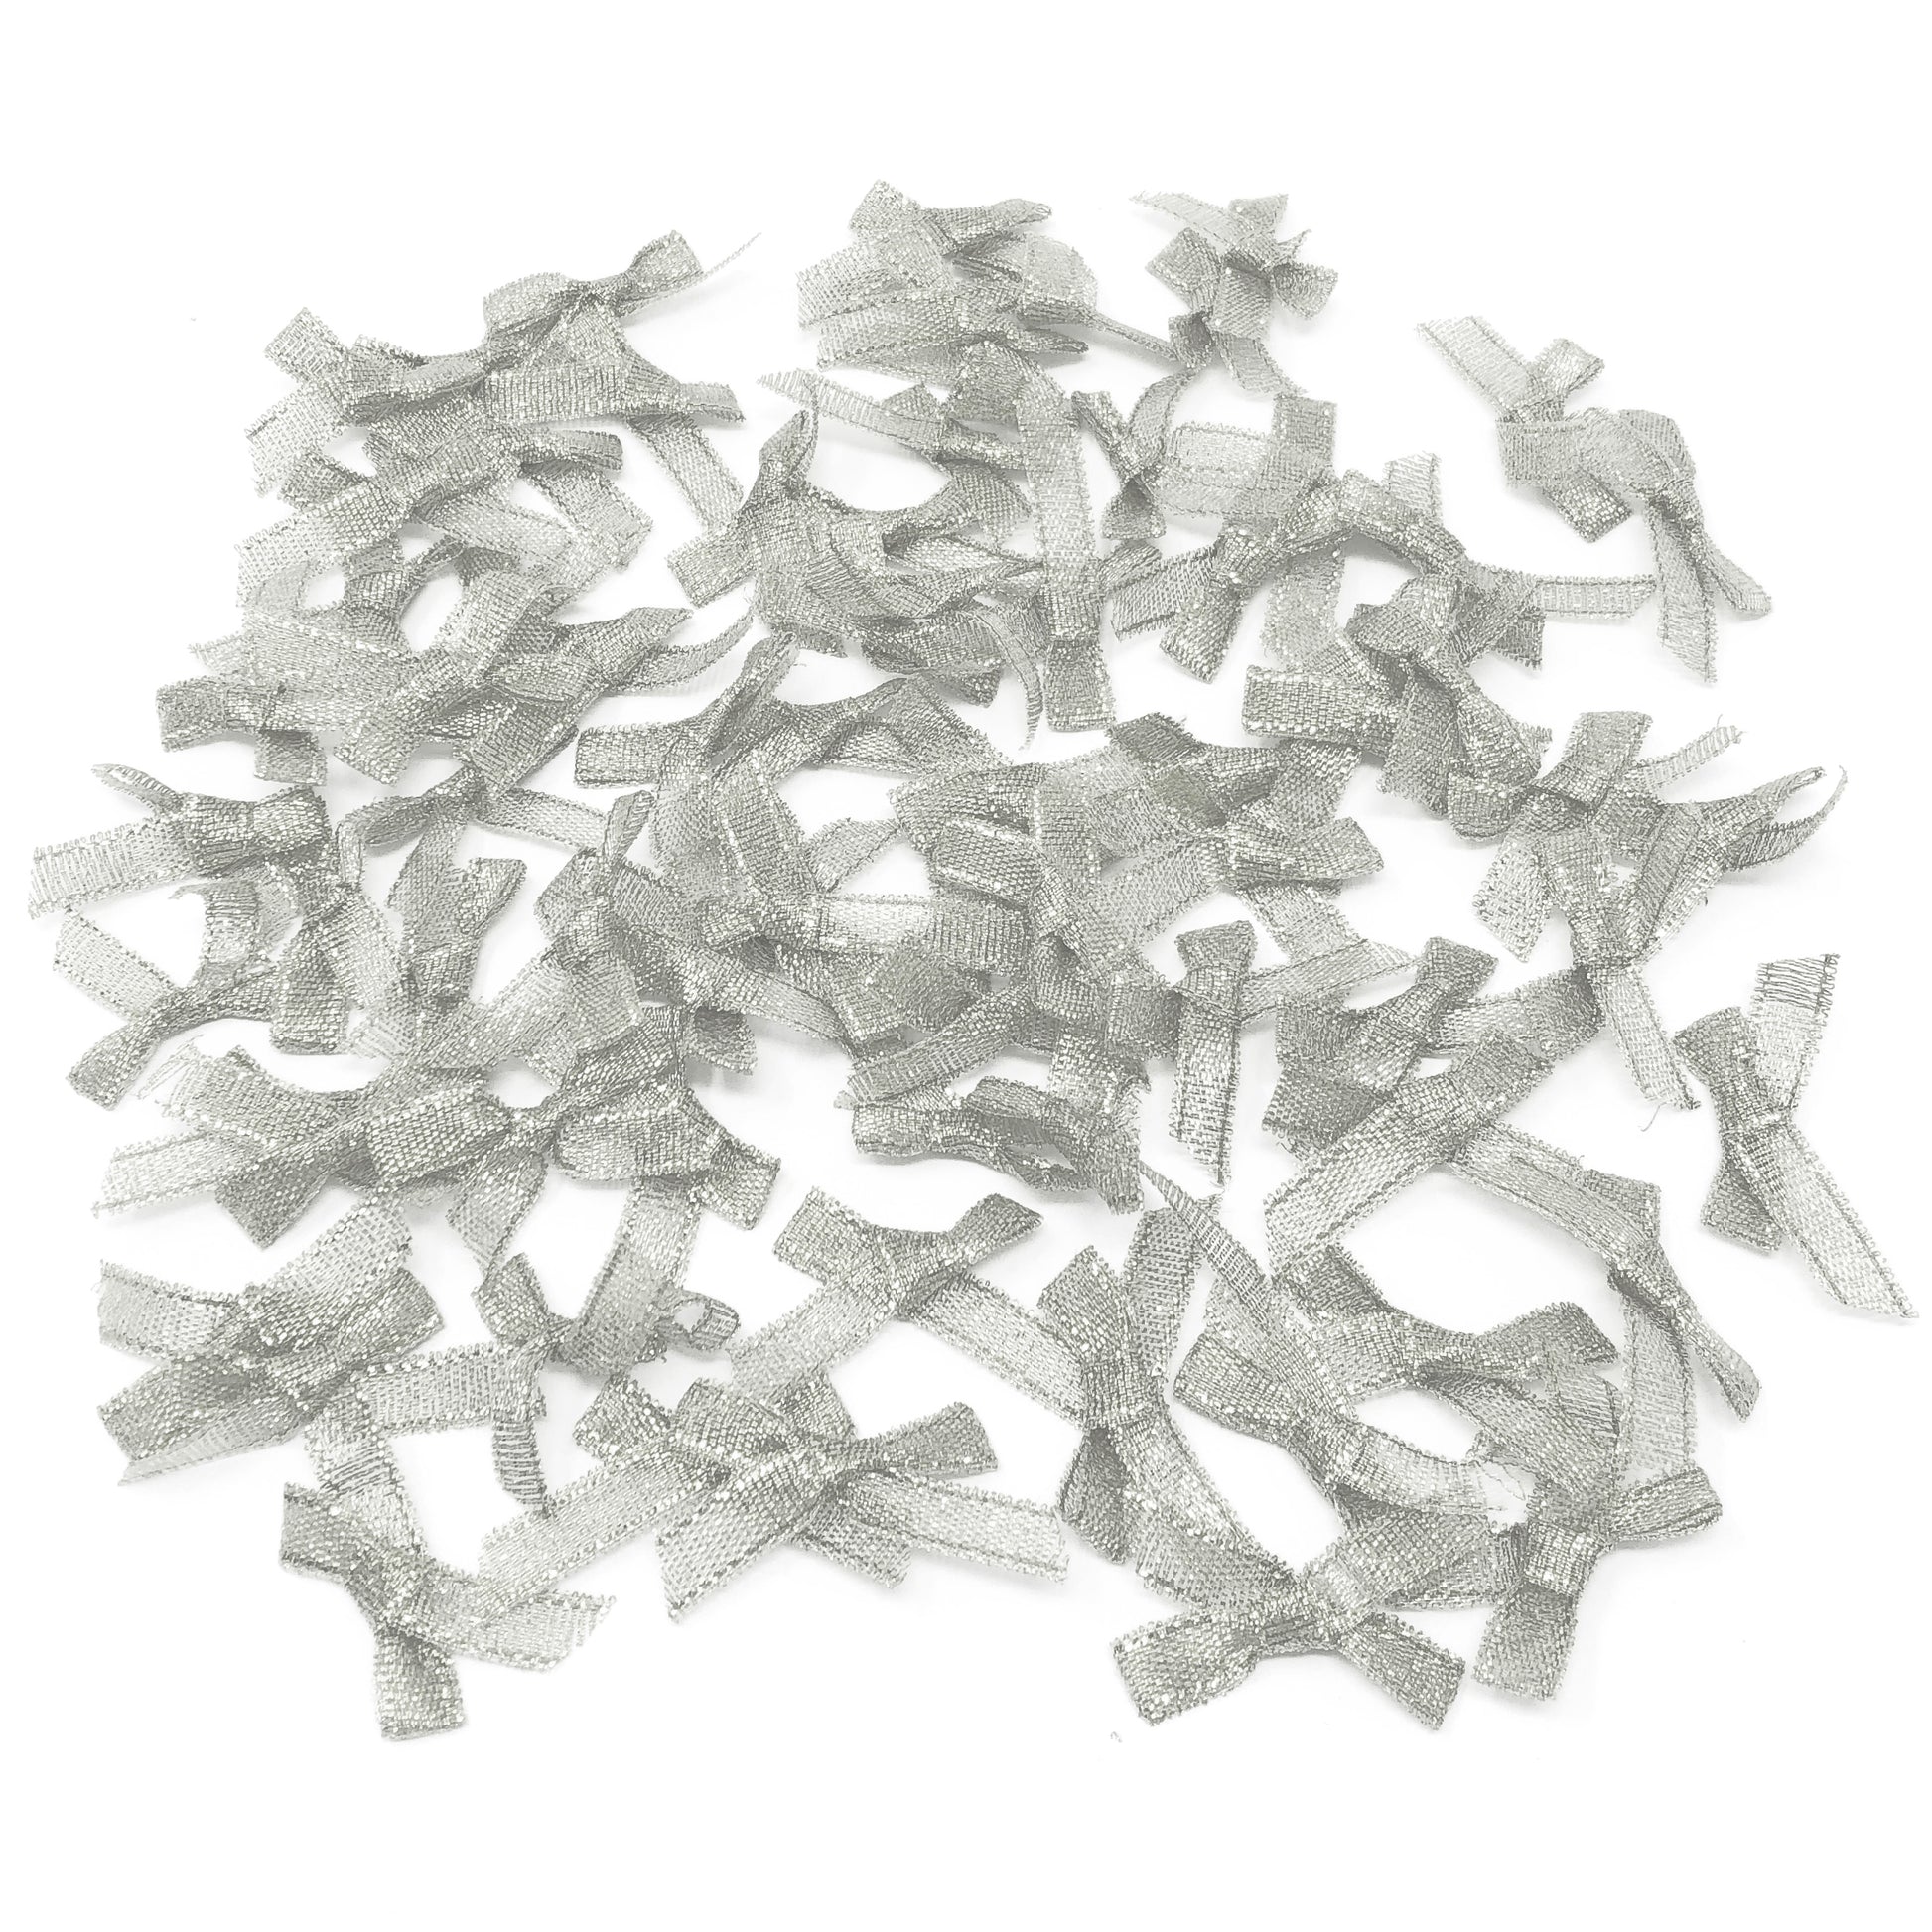 Silver 7mm 40x25mm Christmas Ribbon Bows - Pack of 75